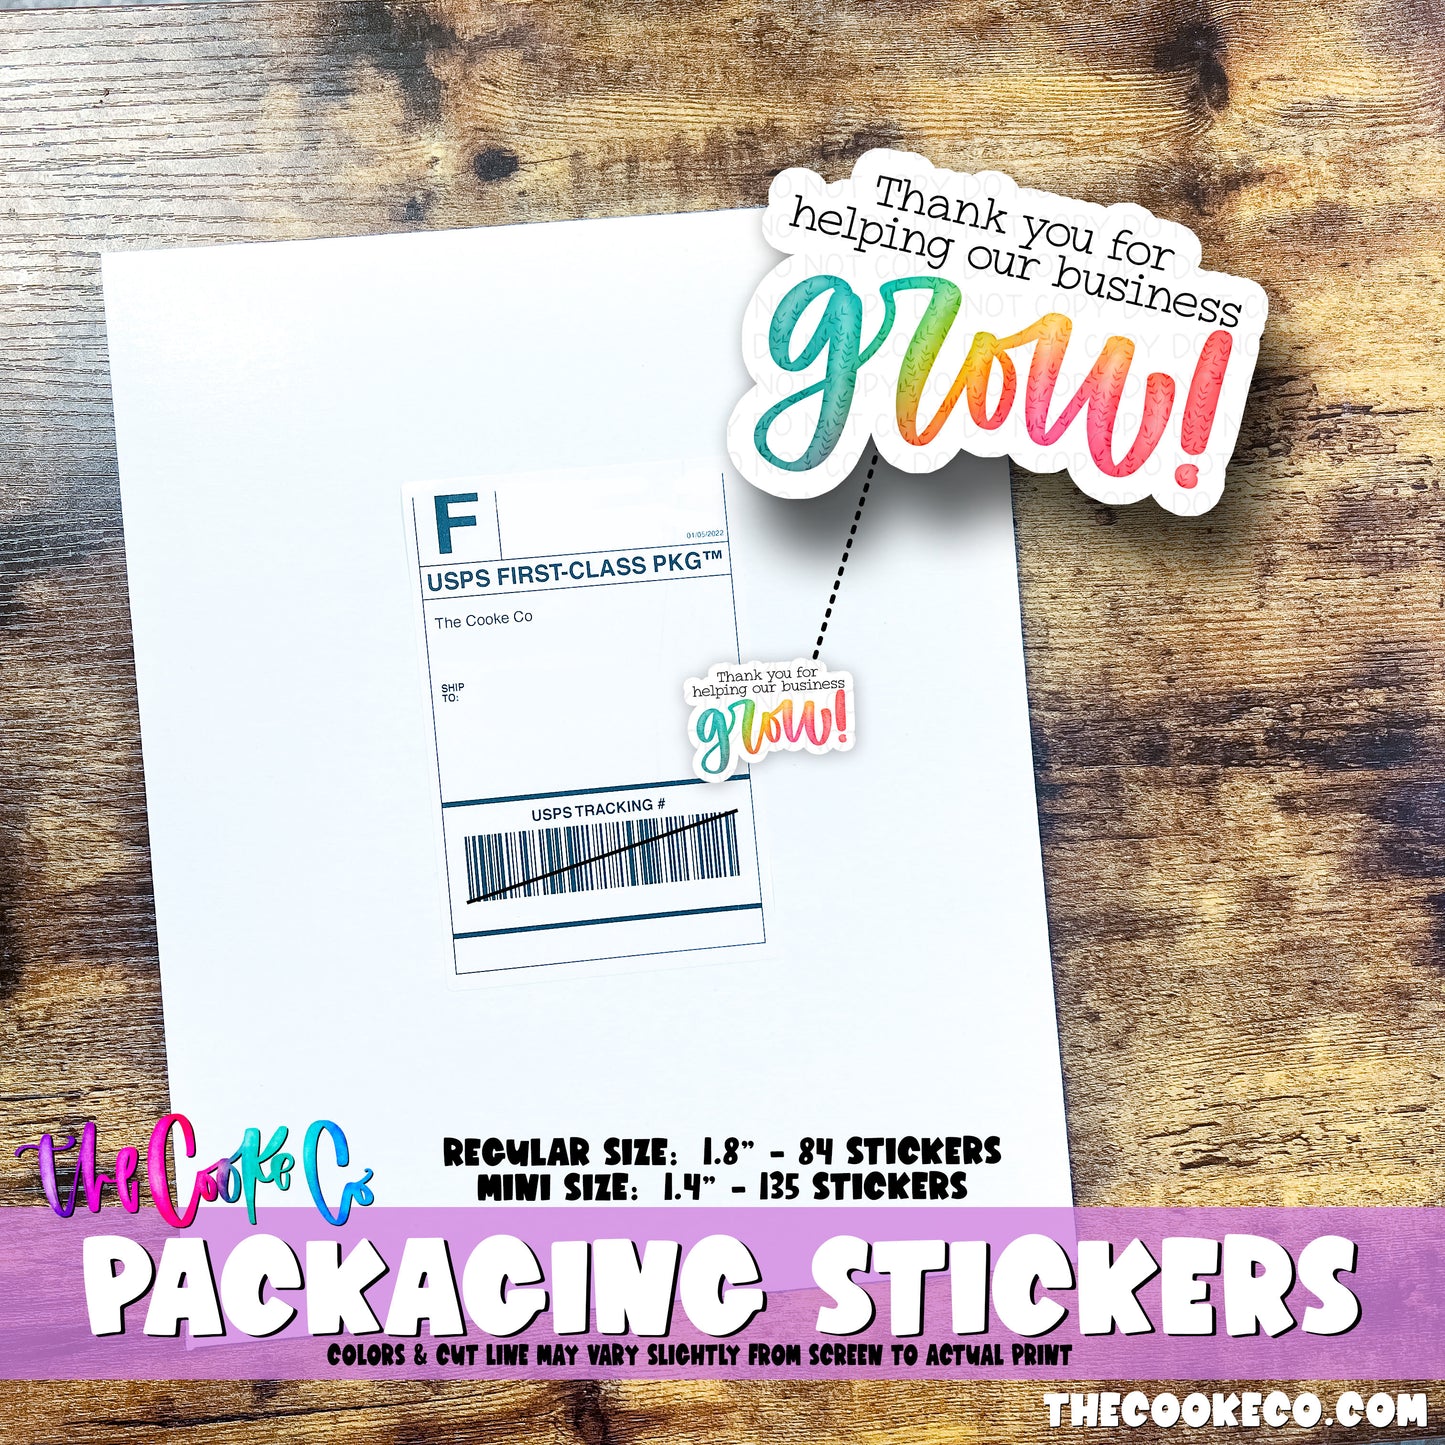 Packaging Stickers | #C0802 - THANK YOU FOR HELPING OUR BUSINESS GROW